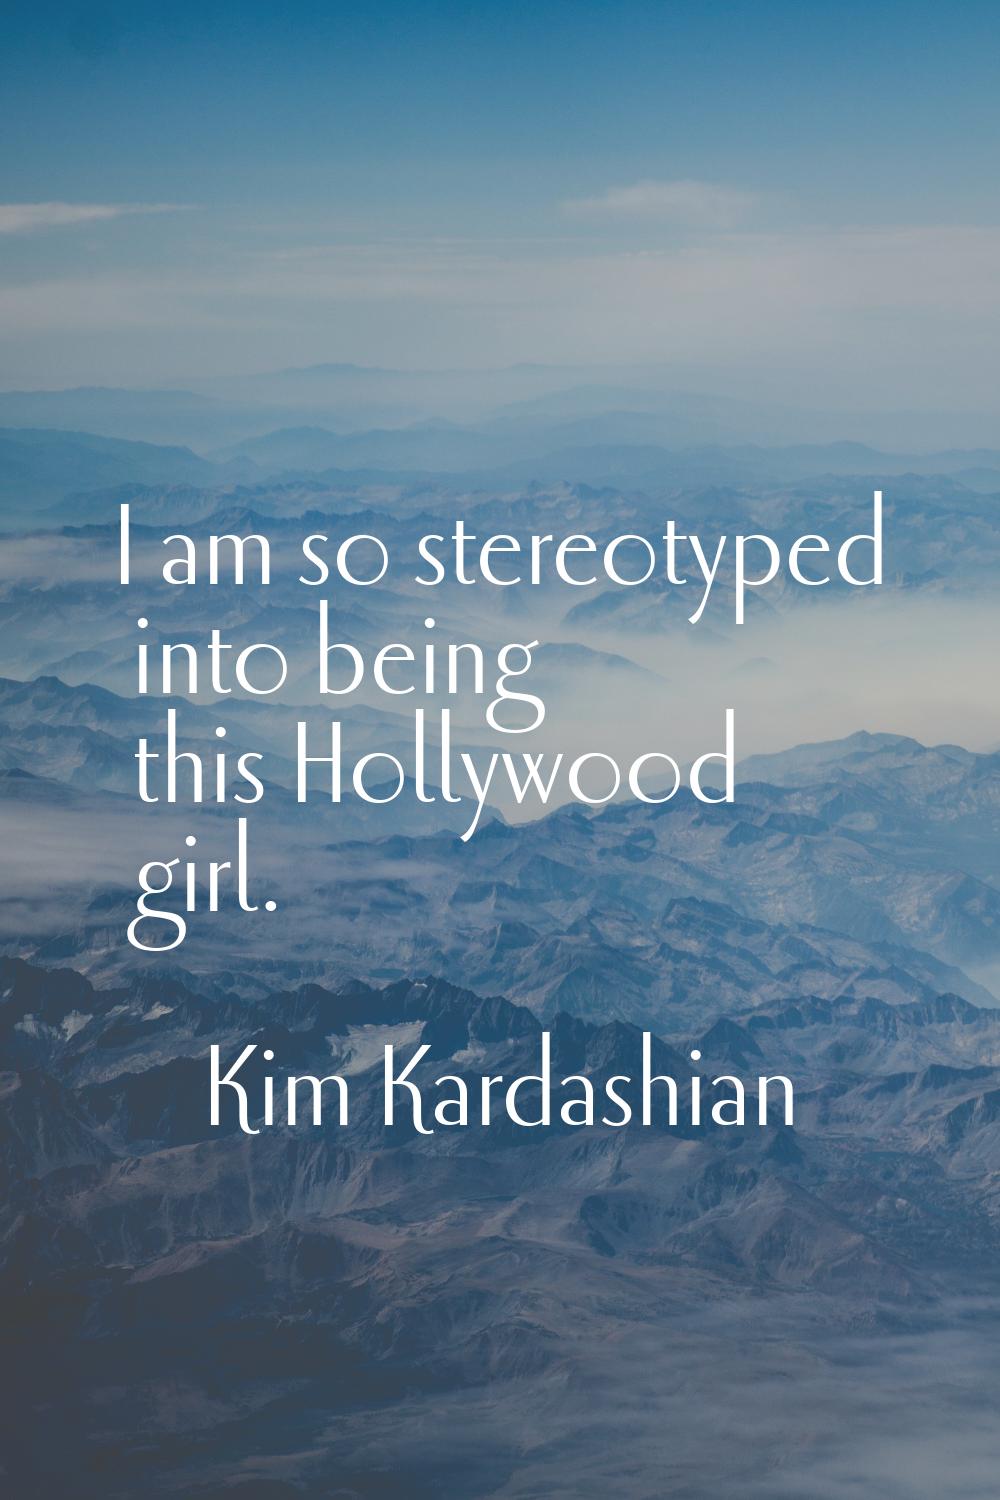 I am so stereotyped into being this Hollywood girl.